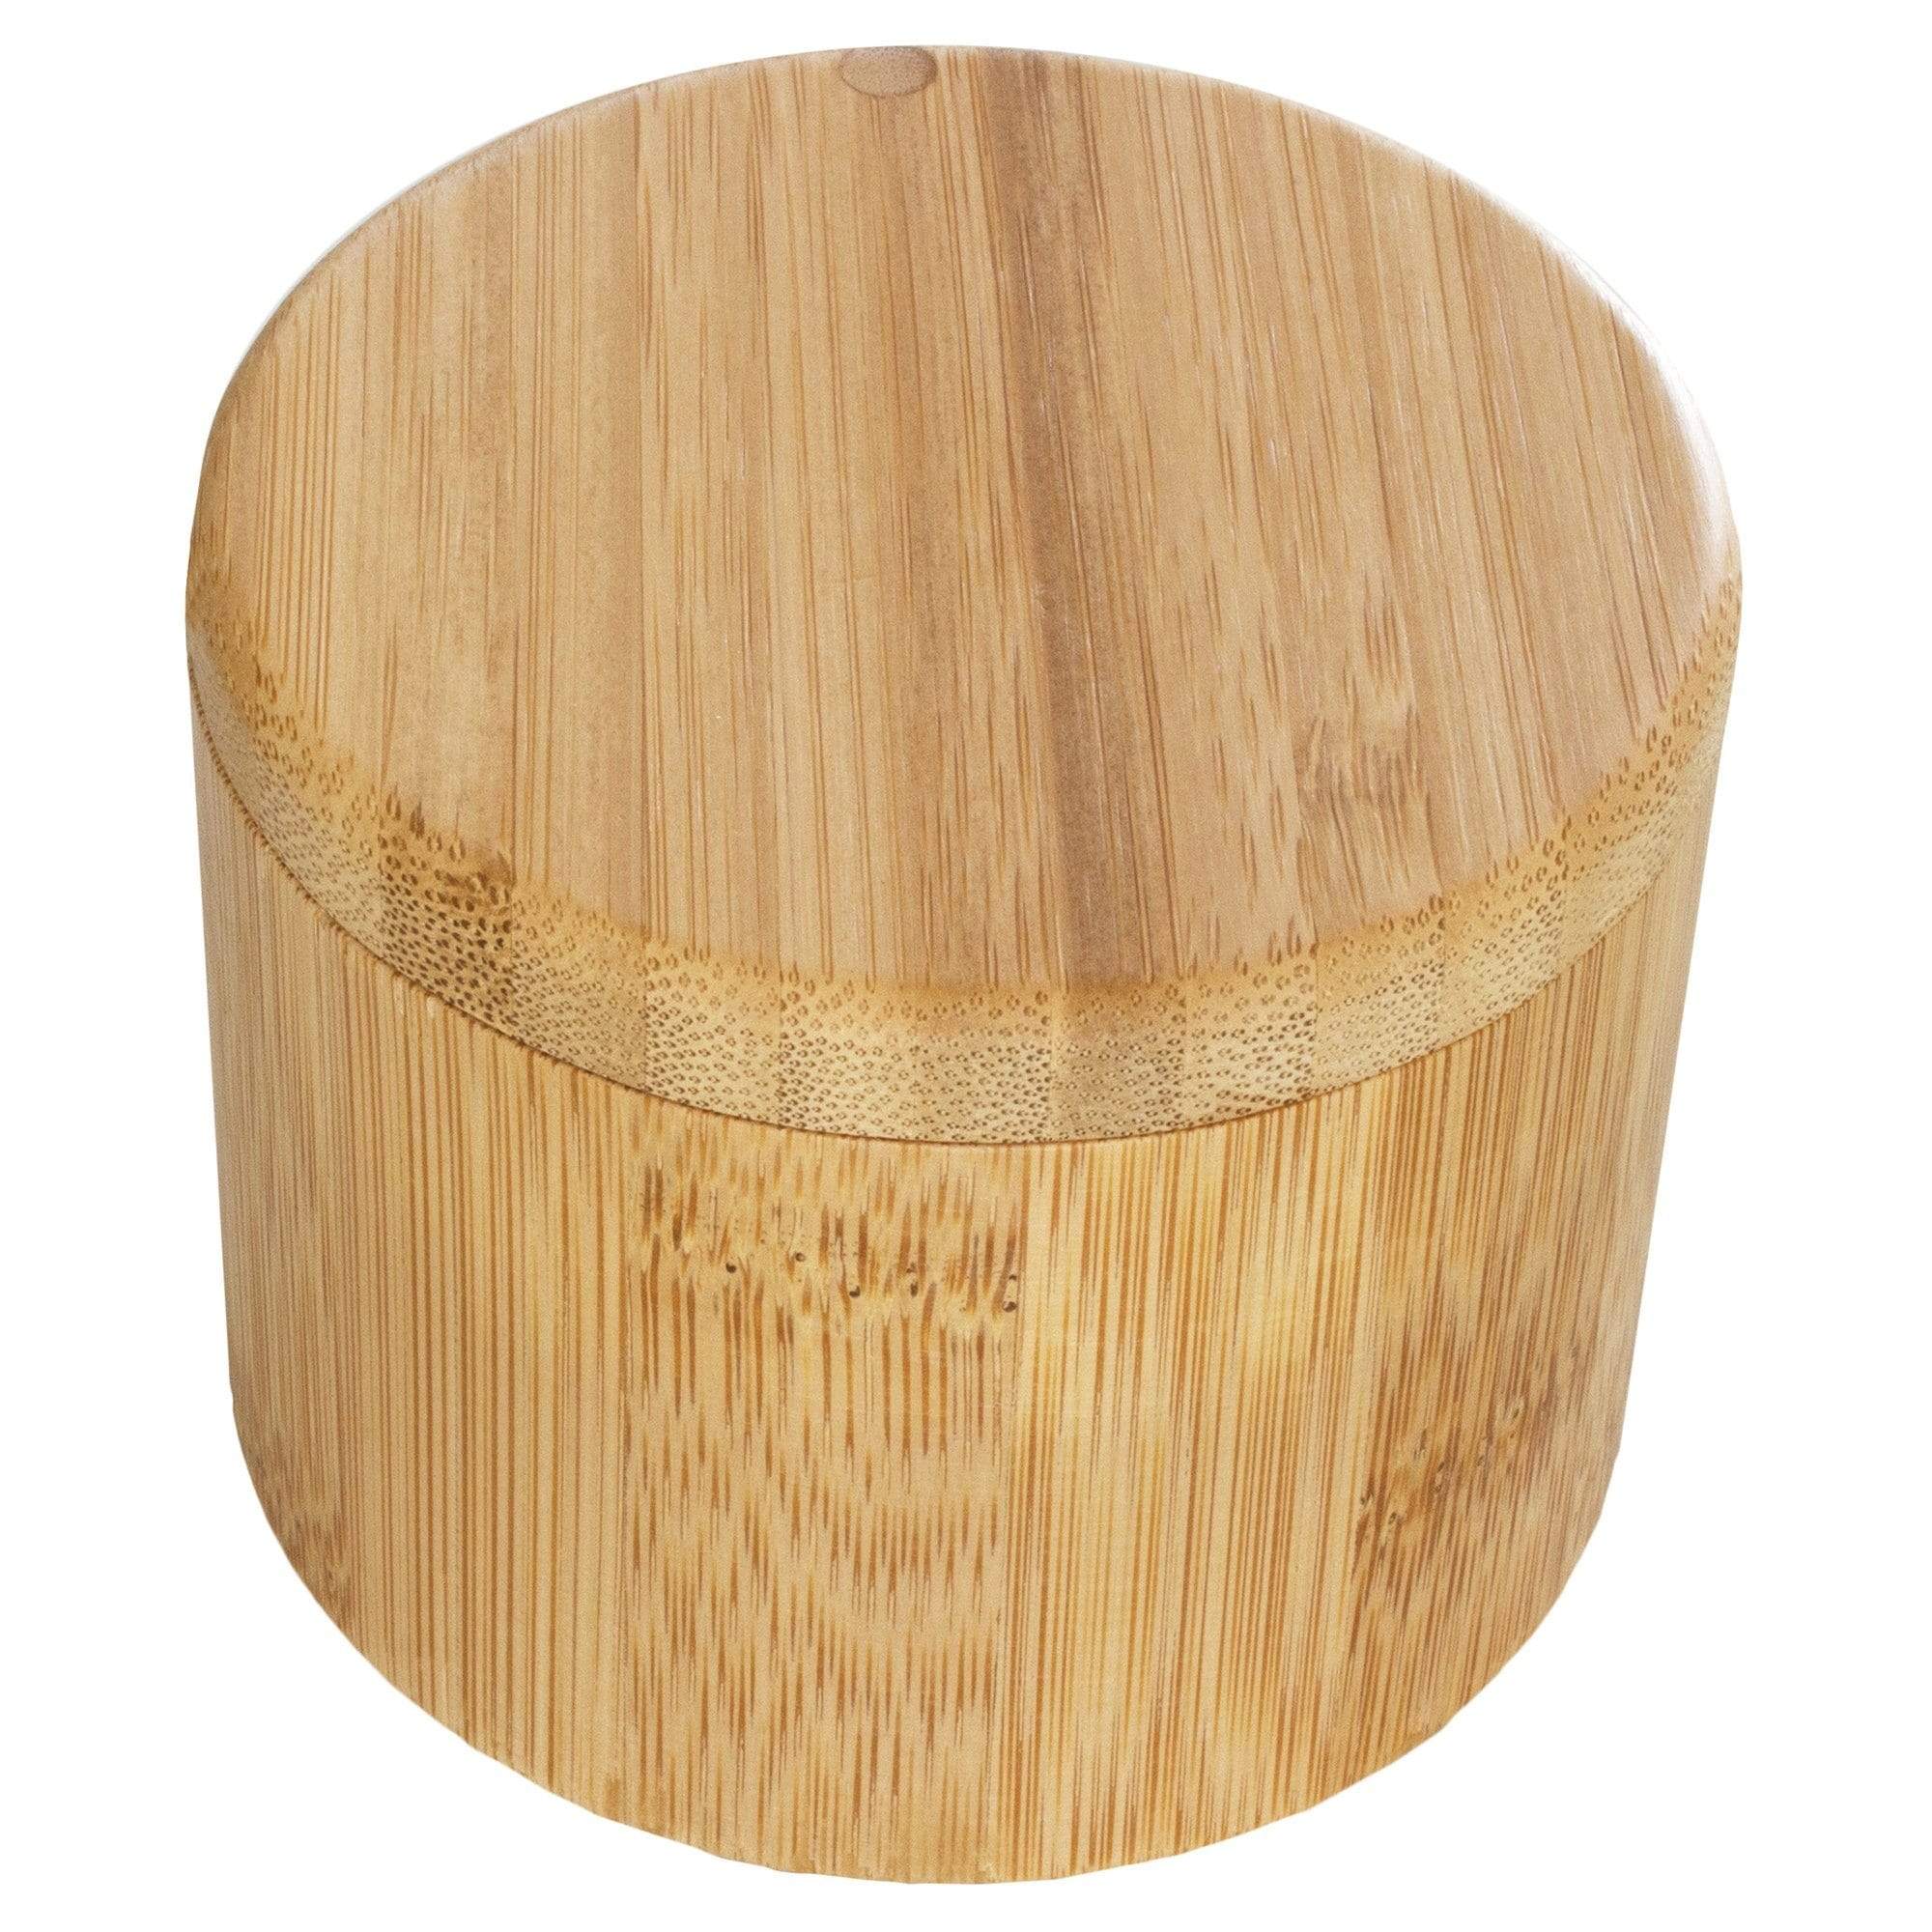 https://totallybamboo.com/cdn/shop/products/salt-box-with-magnetic-swivel-lid-6-oz-capacity-totally-bamboo-955727.jpg?v=1628046407